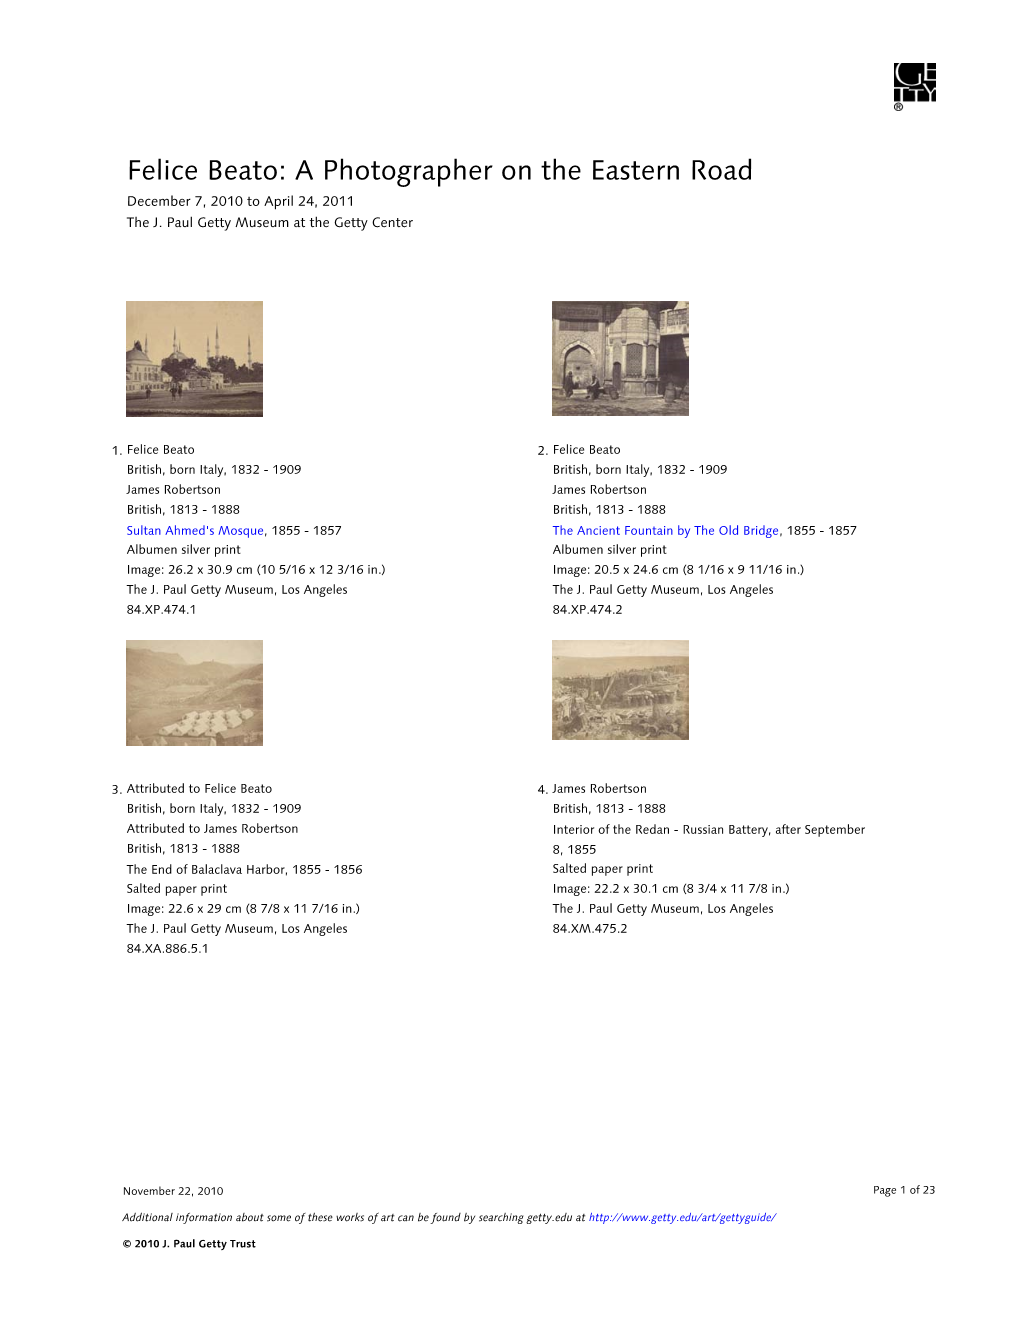 Felice Beato: a Photographer on the Eastern Road December 7, 2010 to April 24, 2011 the J